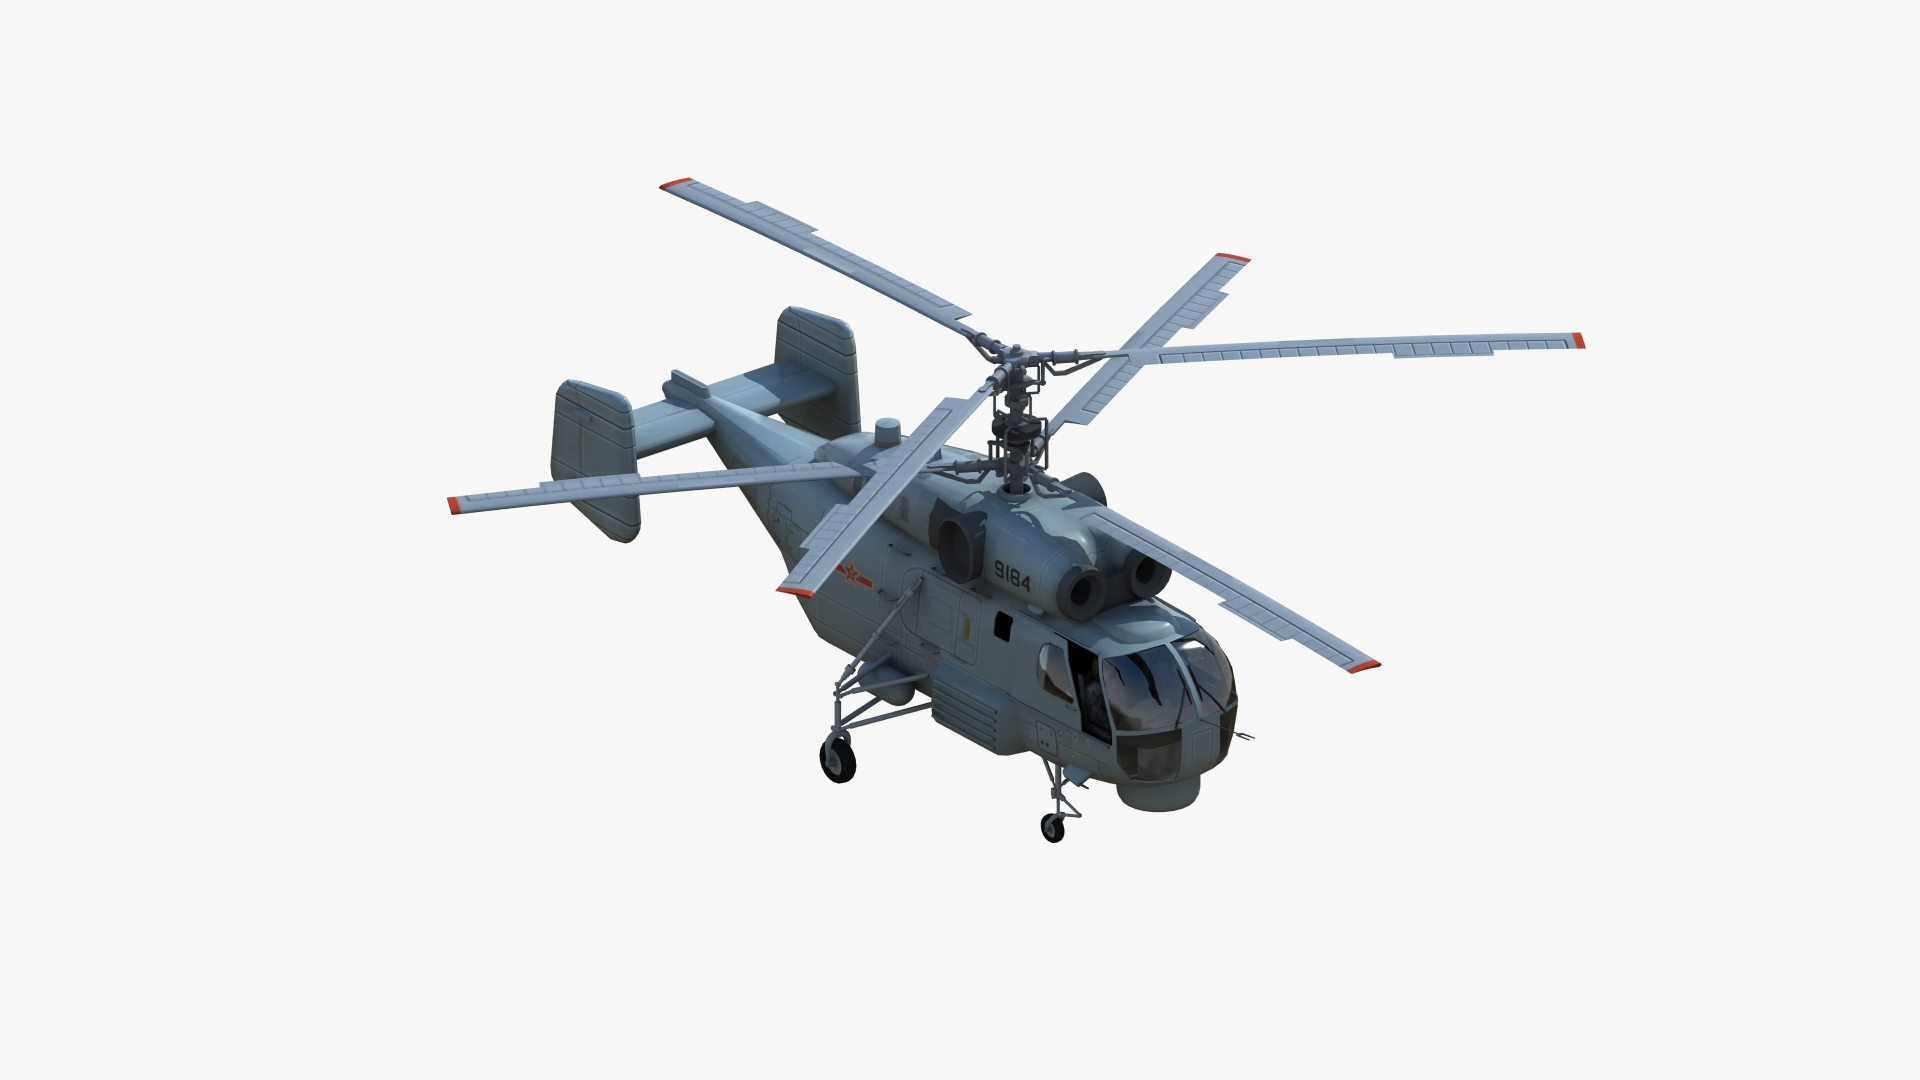 chinese military helicopters model https://p.turbosquid.com/ts-thumb/ui/KysFxp/h99iMqtI/chinesehelix_tt/jpg/1587571030/1920x1080/turn_fit_q99/f40ce06a896ea630c38cc4b1db3455fd76e2cd7e/chinesehelix_tt-1.jpg